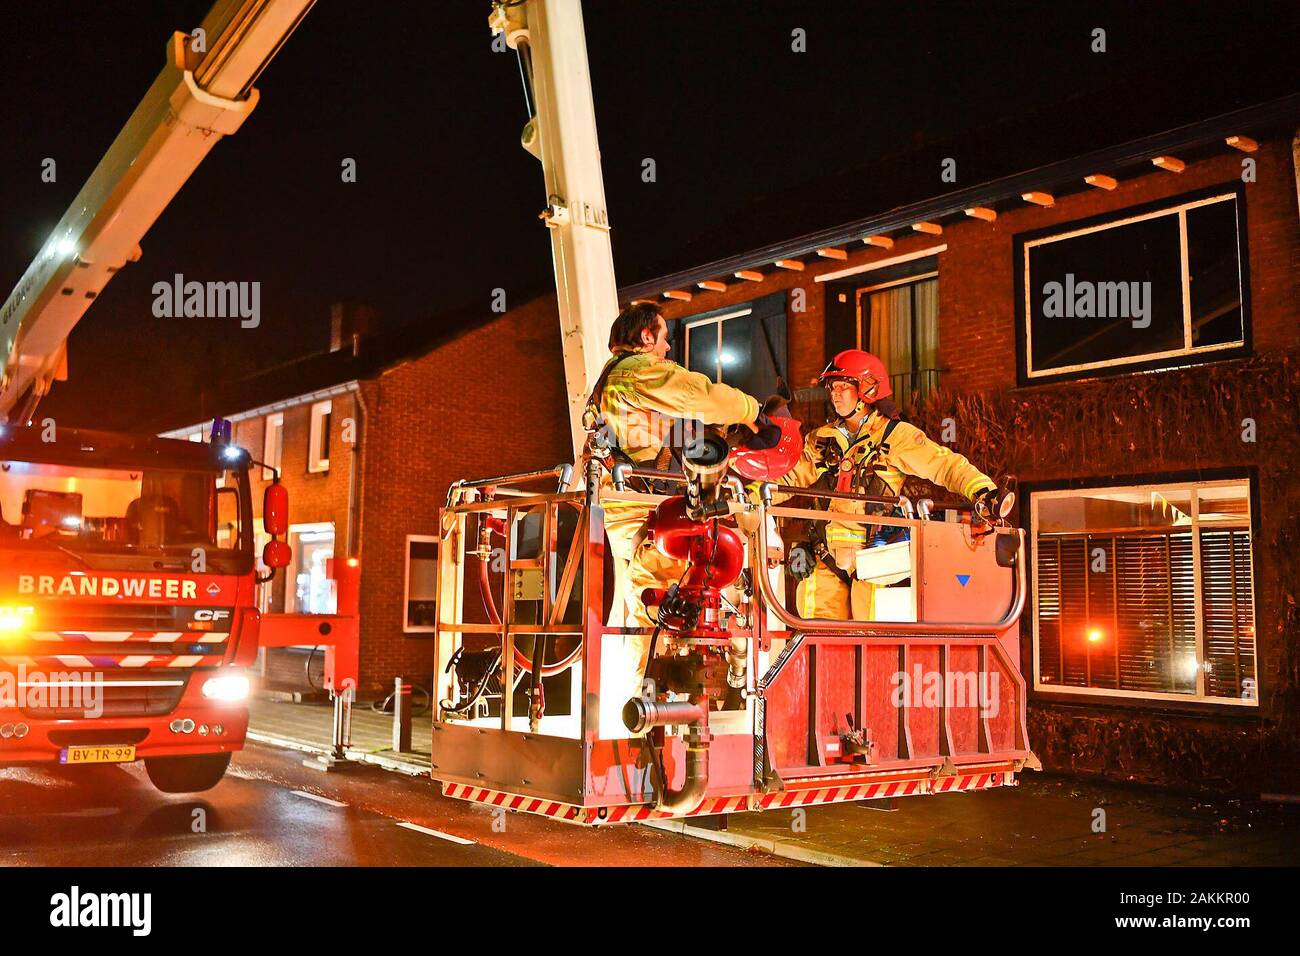 HEEZE, Netherlands. 09th Jan, 2020. dutchnews, Large fire in thrift store Heeze Credit: Pro Shots/Alamy Live News Stock Photo